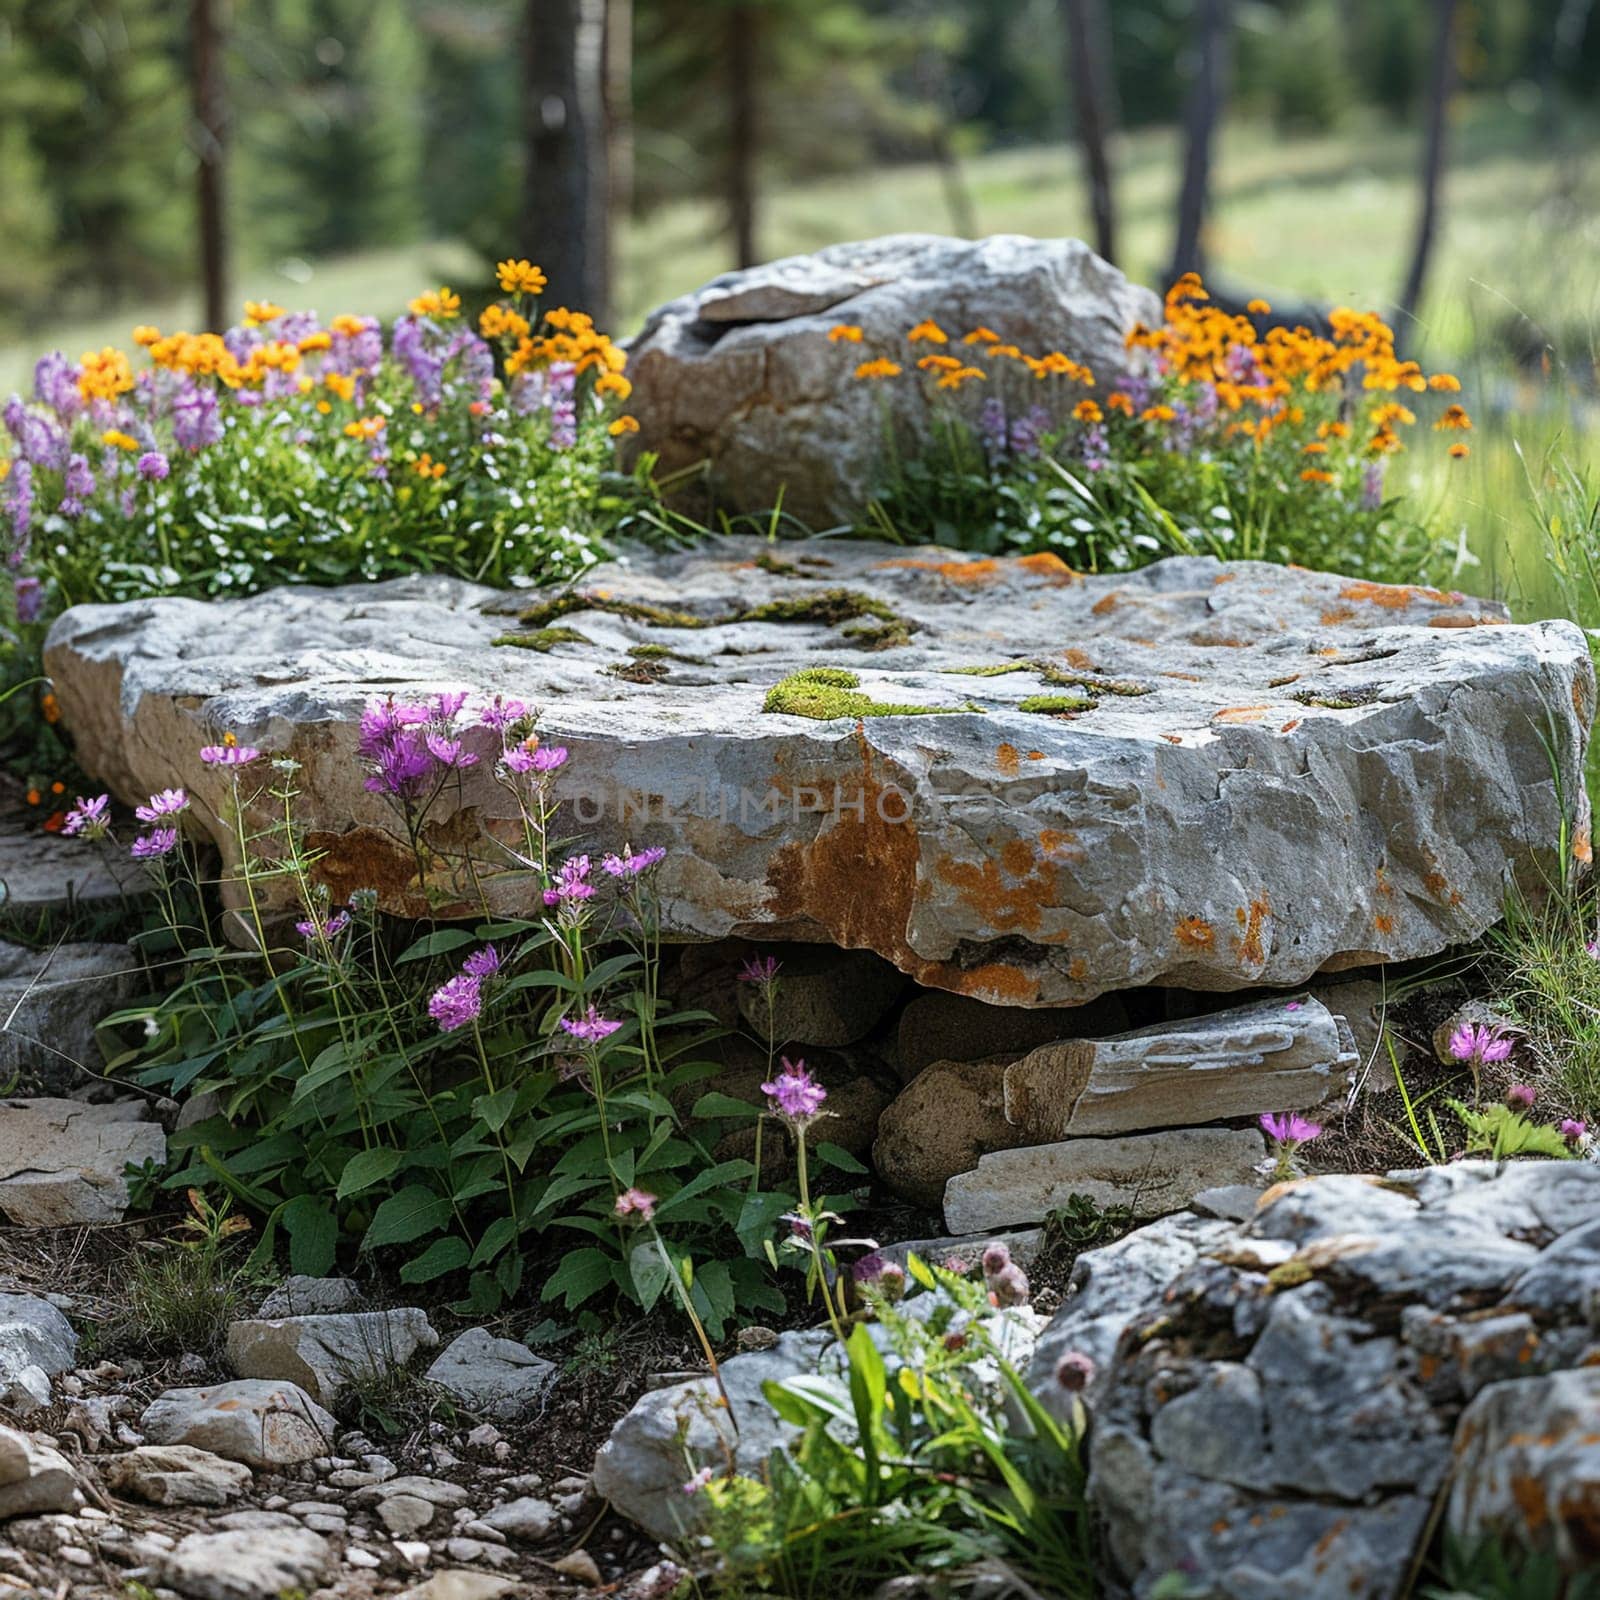 Rustic Stone Plinth Surrounded by Wildflowers and Greenery The natural textures blur into an outdoor by Benzoix